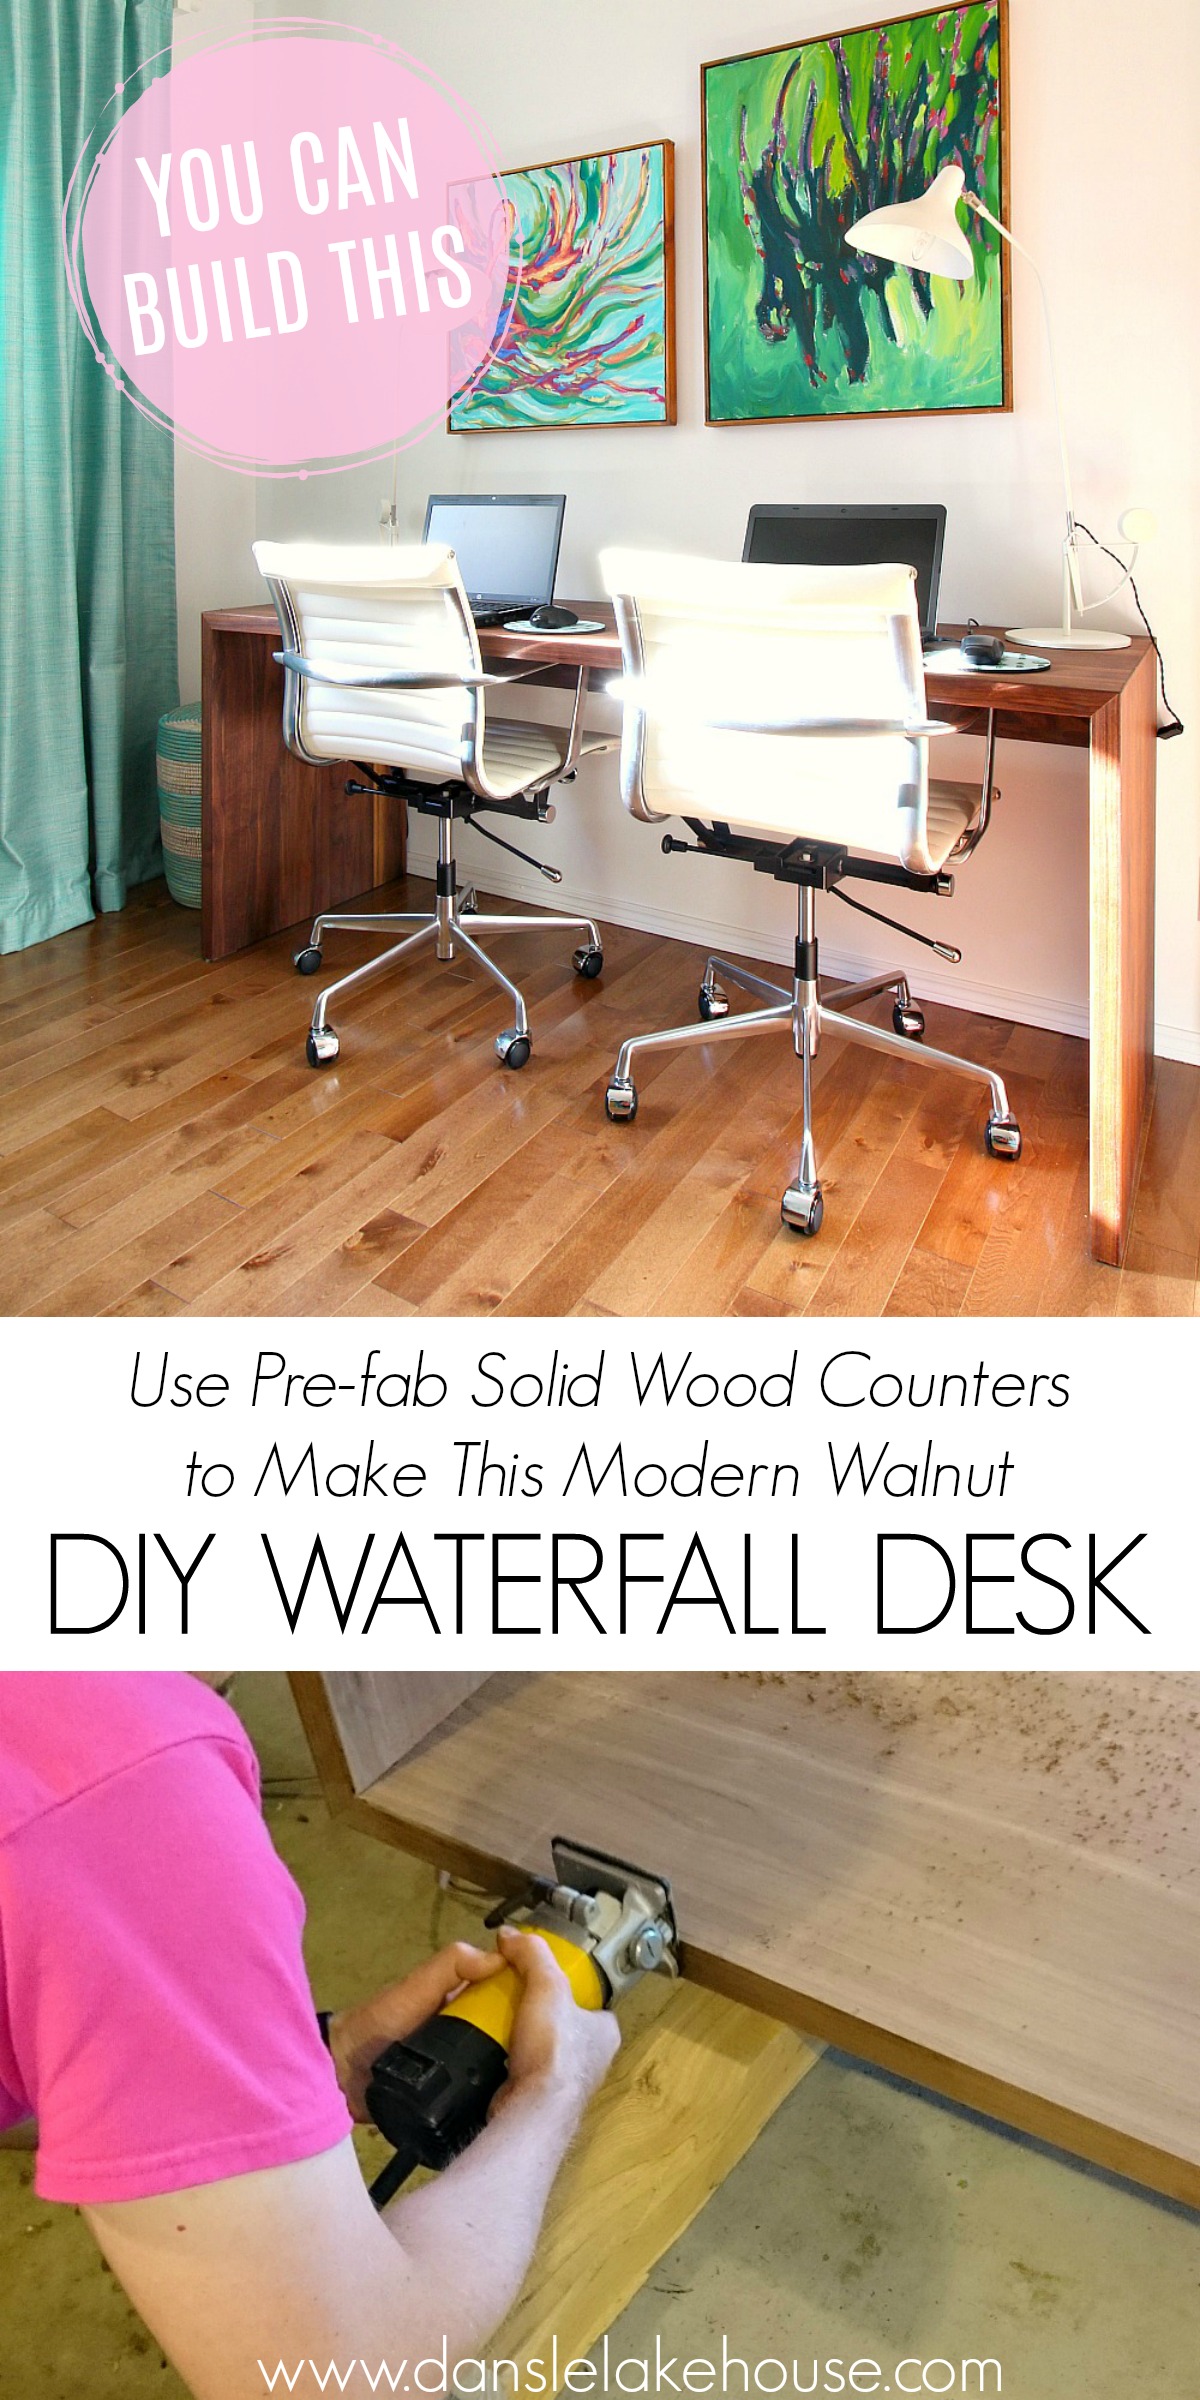 Learn How to Build This Solid Walnut DIY Waterfall Desk for Two | Dans le Lakehouse #workspace #woodworking #diyfurniture #walnut